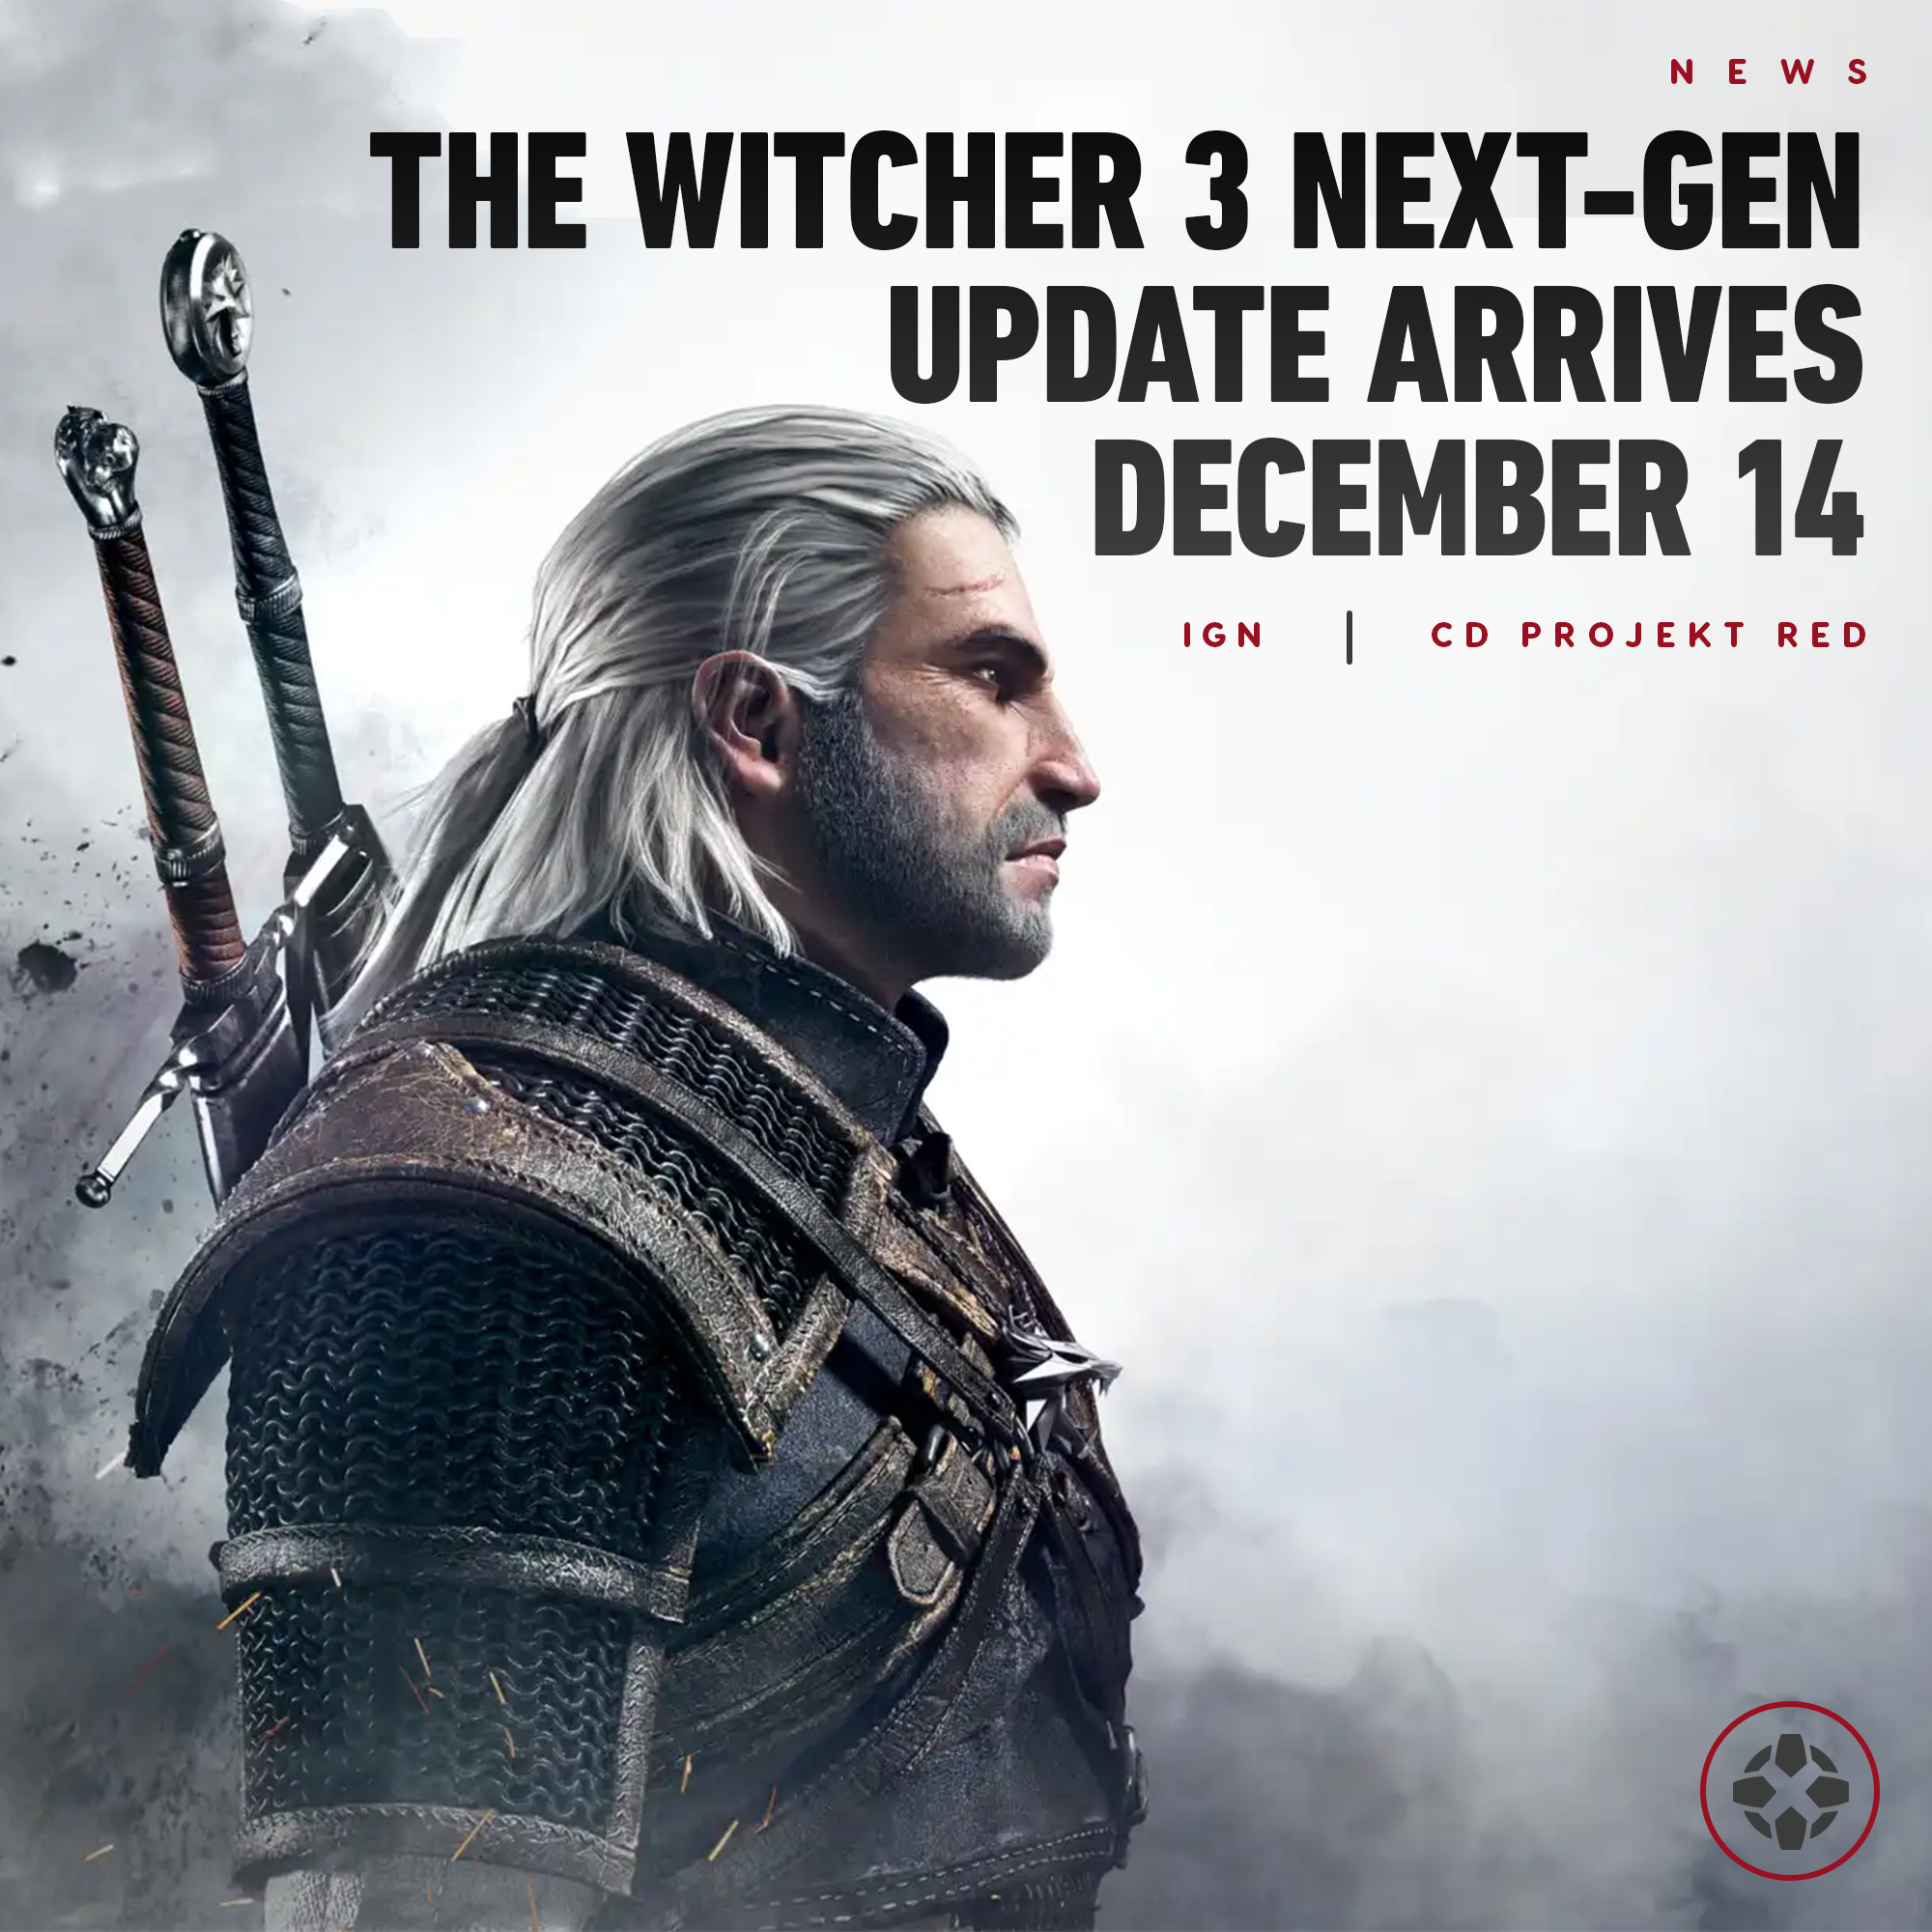 The Witcher - IGN